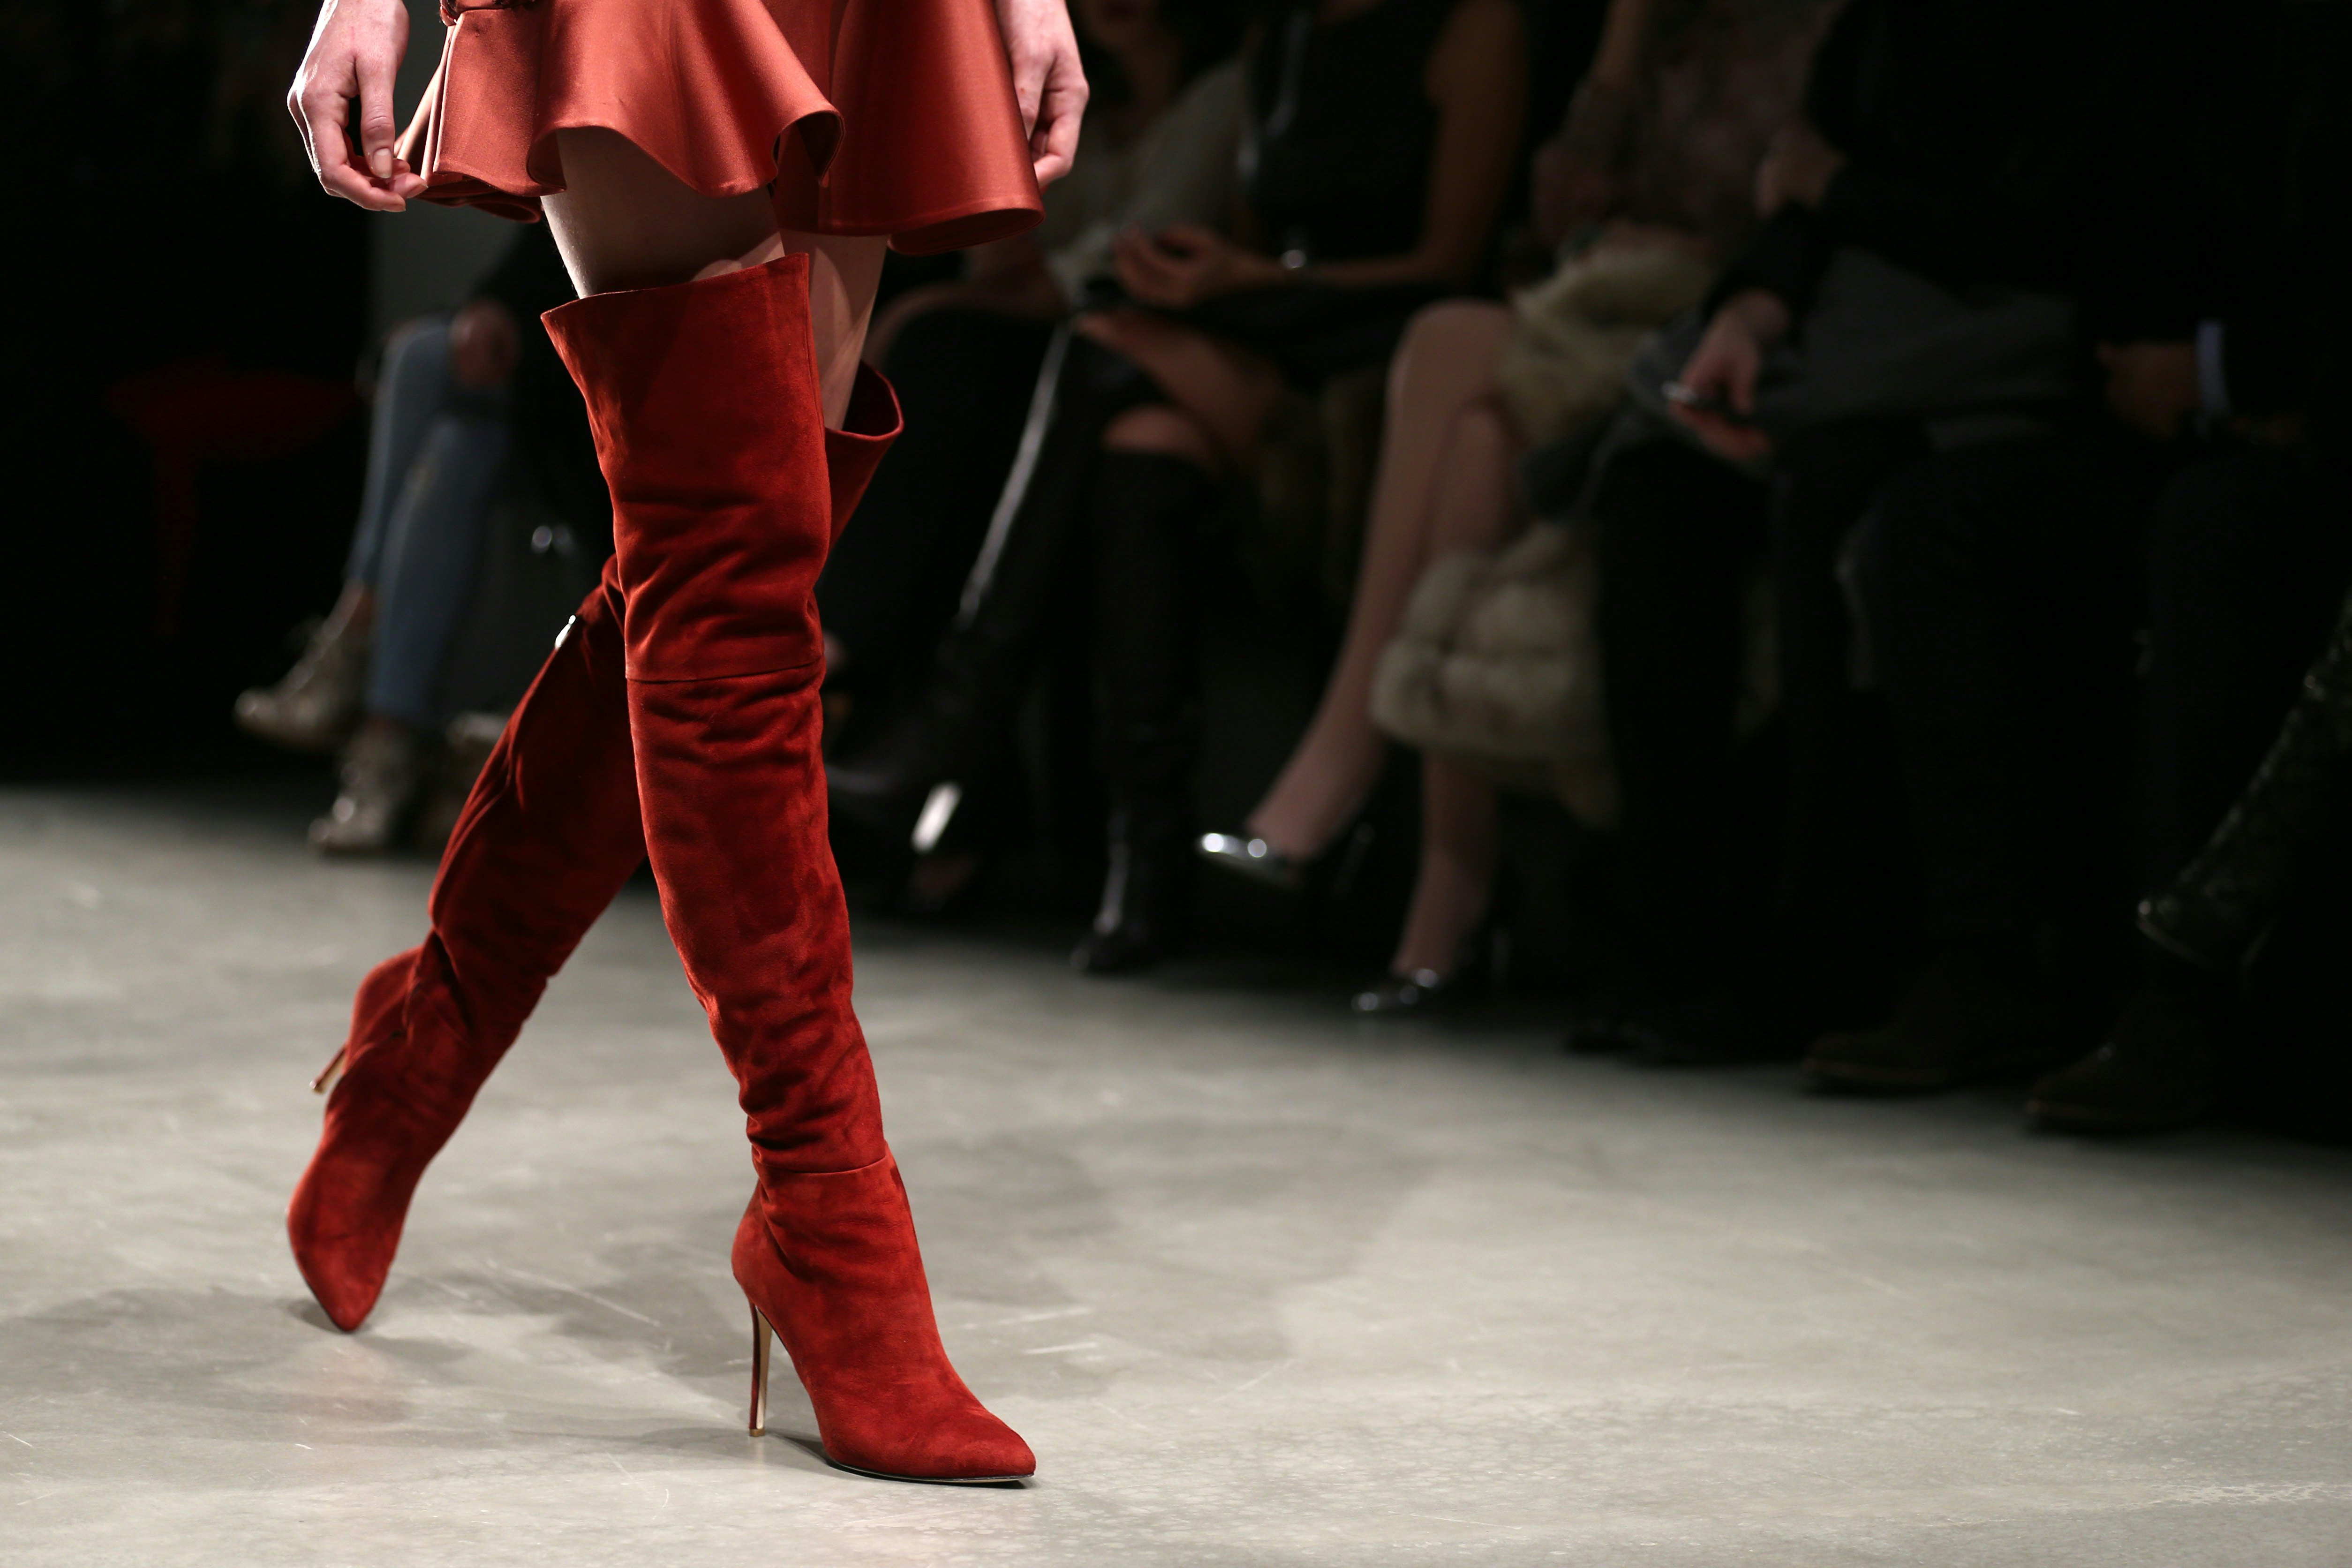 aldo red thigh high boots